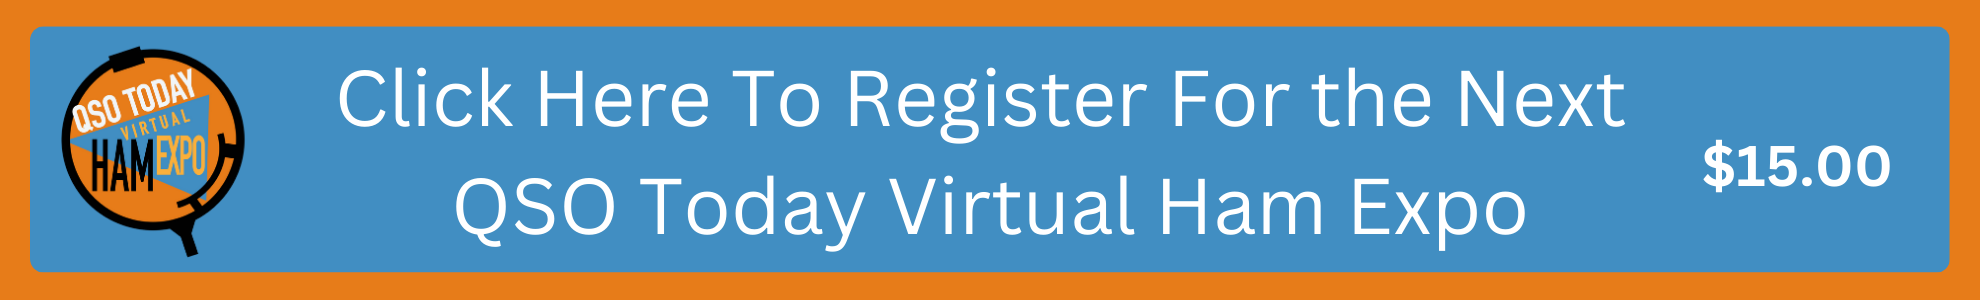 Click here to register for the next QSO Today Virtual ham Expo